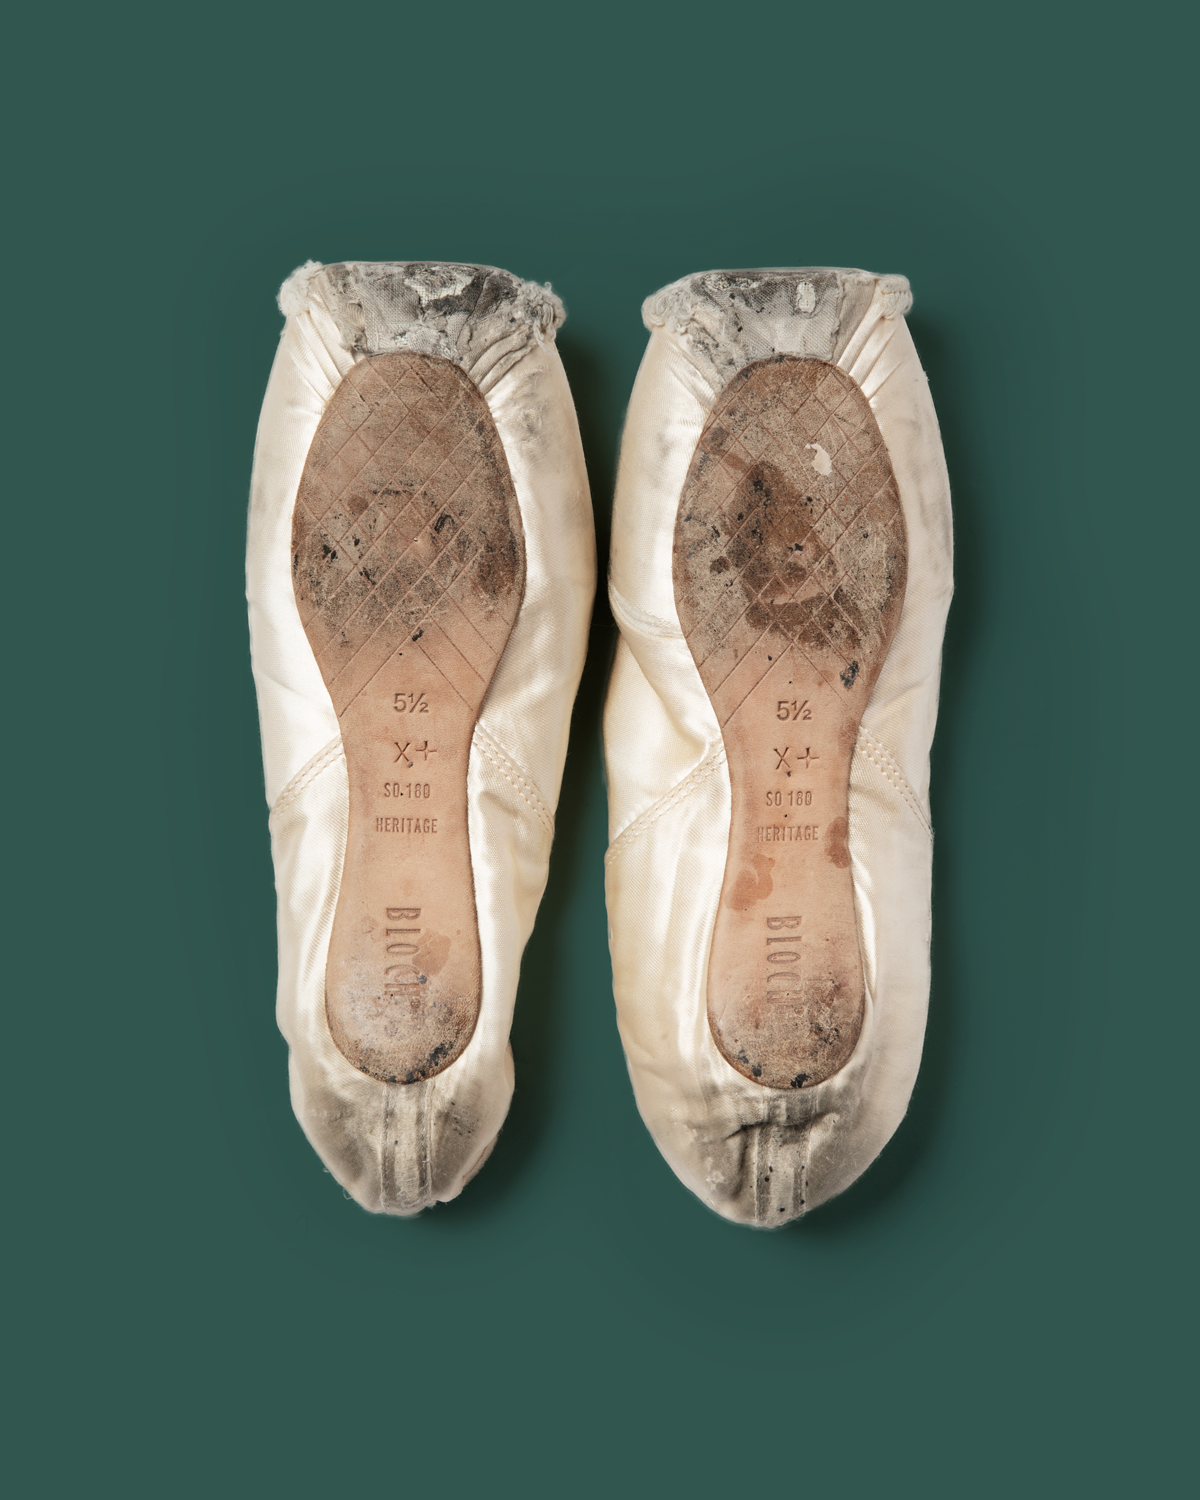 How do you know when your pointe shoes are dead?